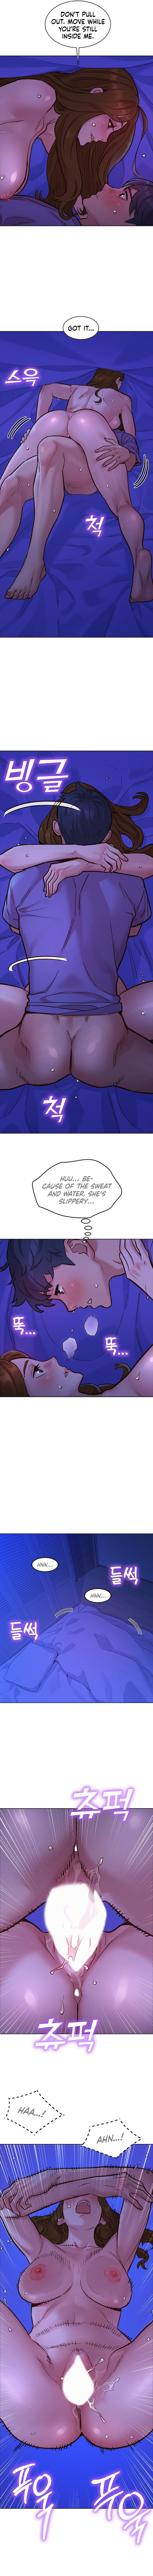 lets-hang-out-from-today-chap-38-3